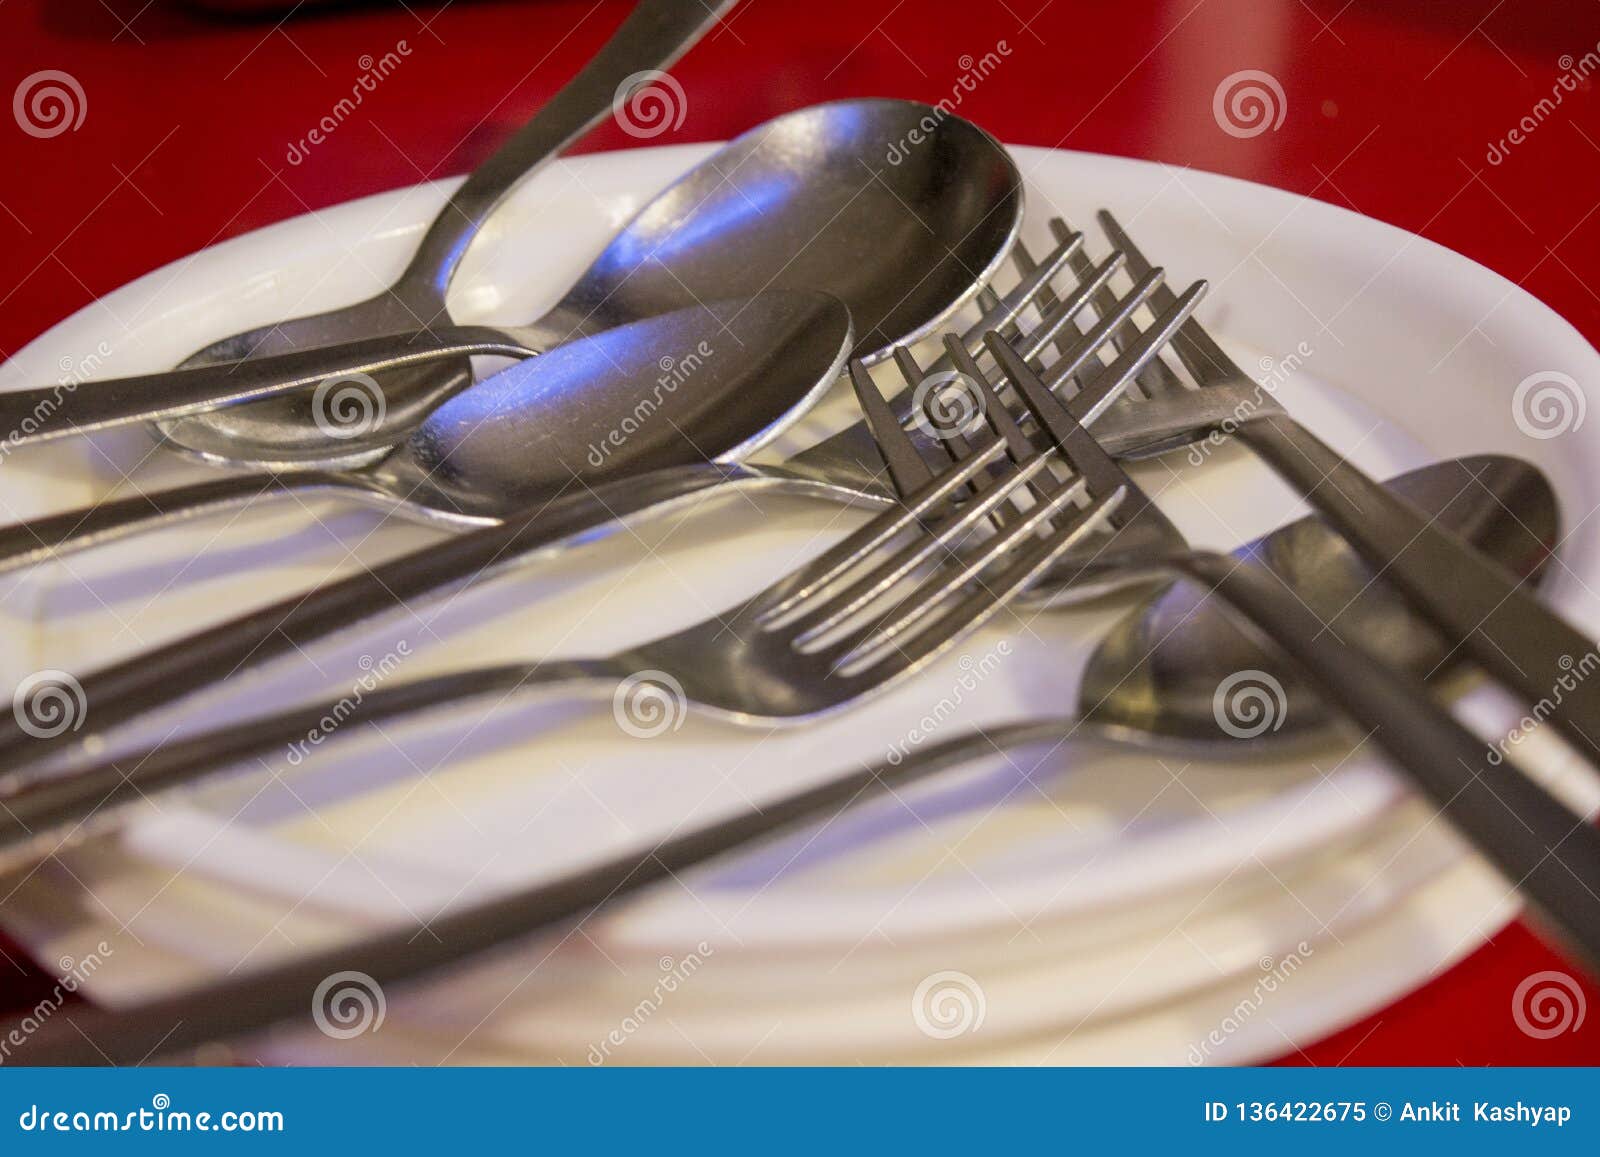 Spoons And Folks In White Plates In A Restaurant Stock Image Image Of Festive Brunch 136422675